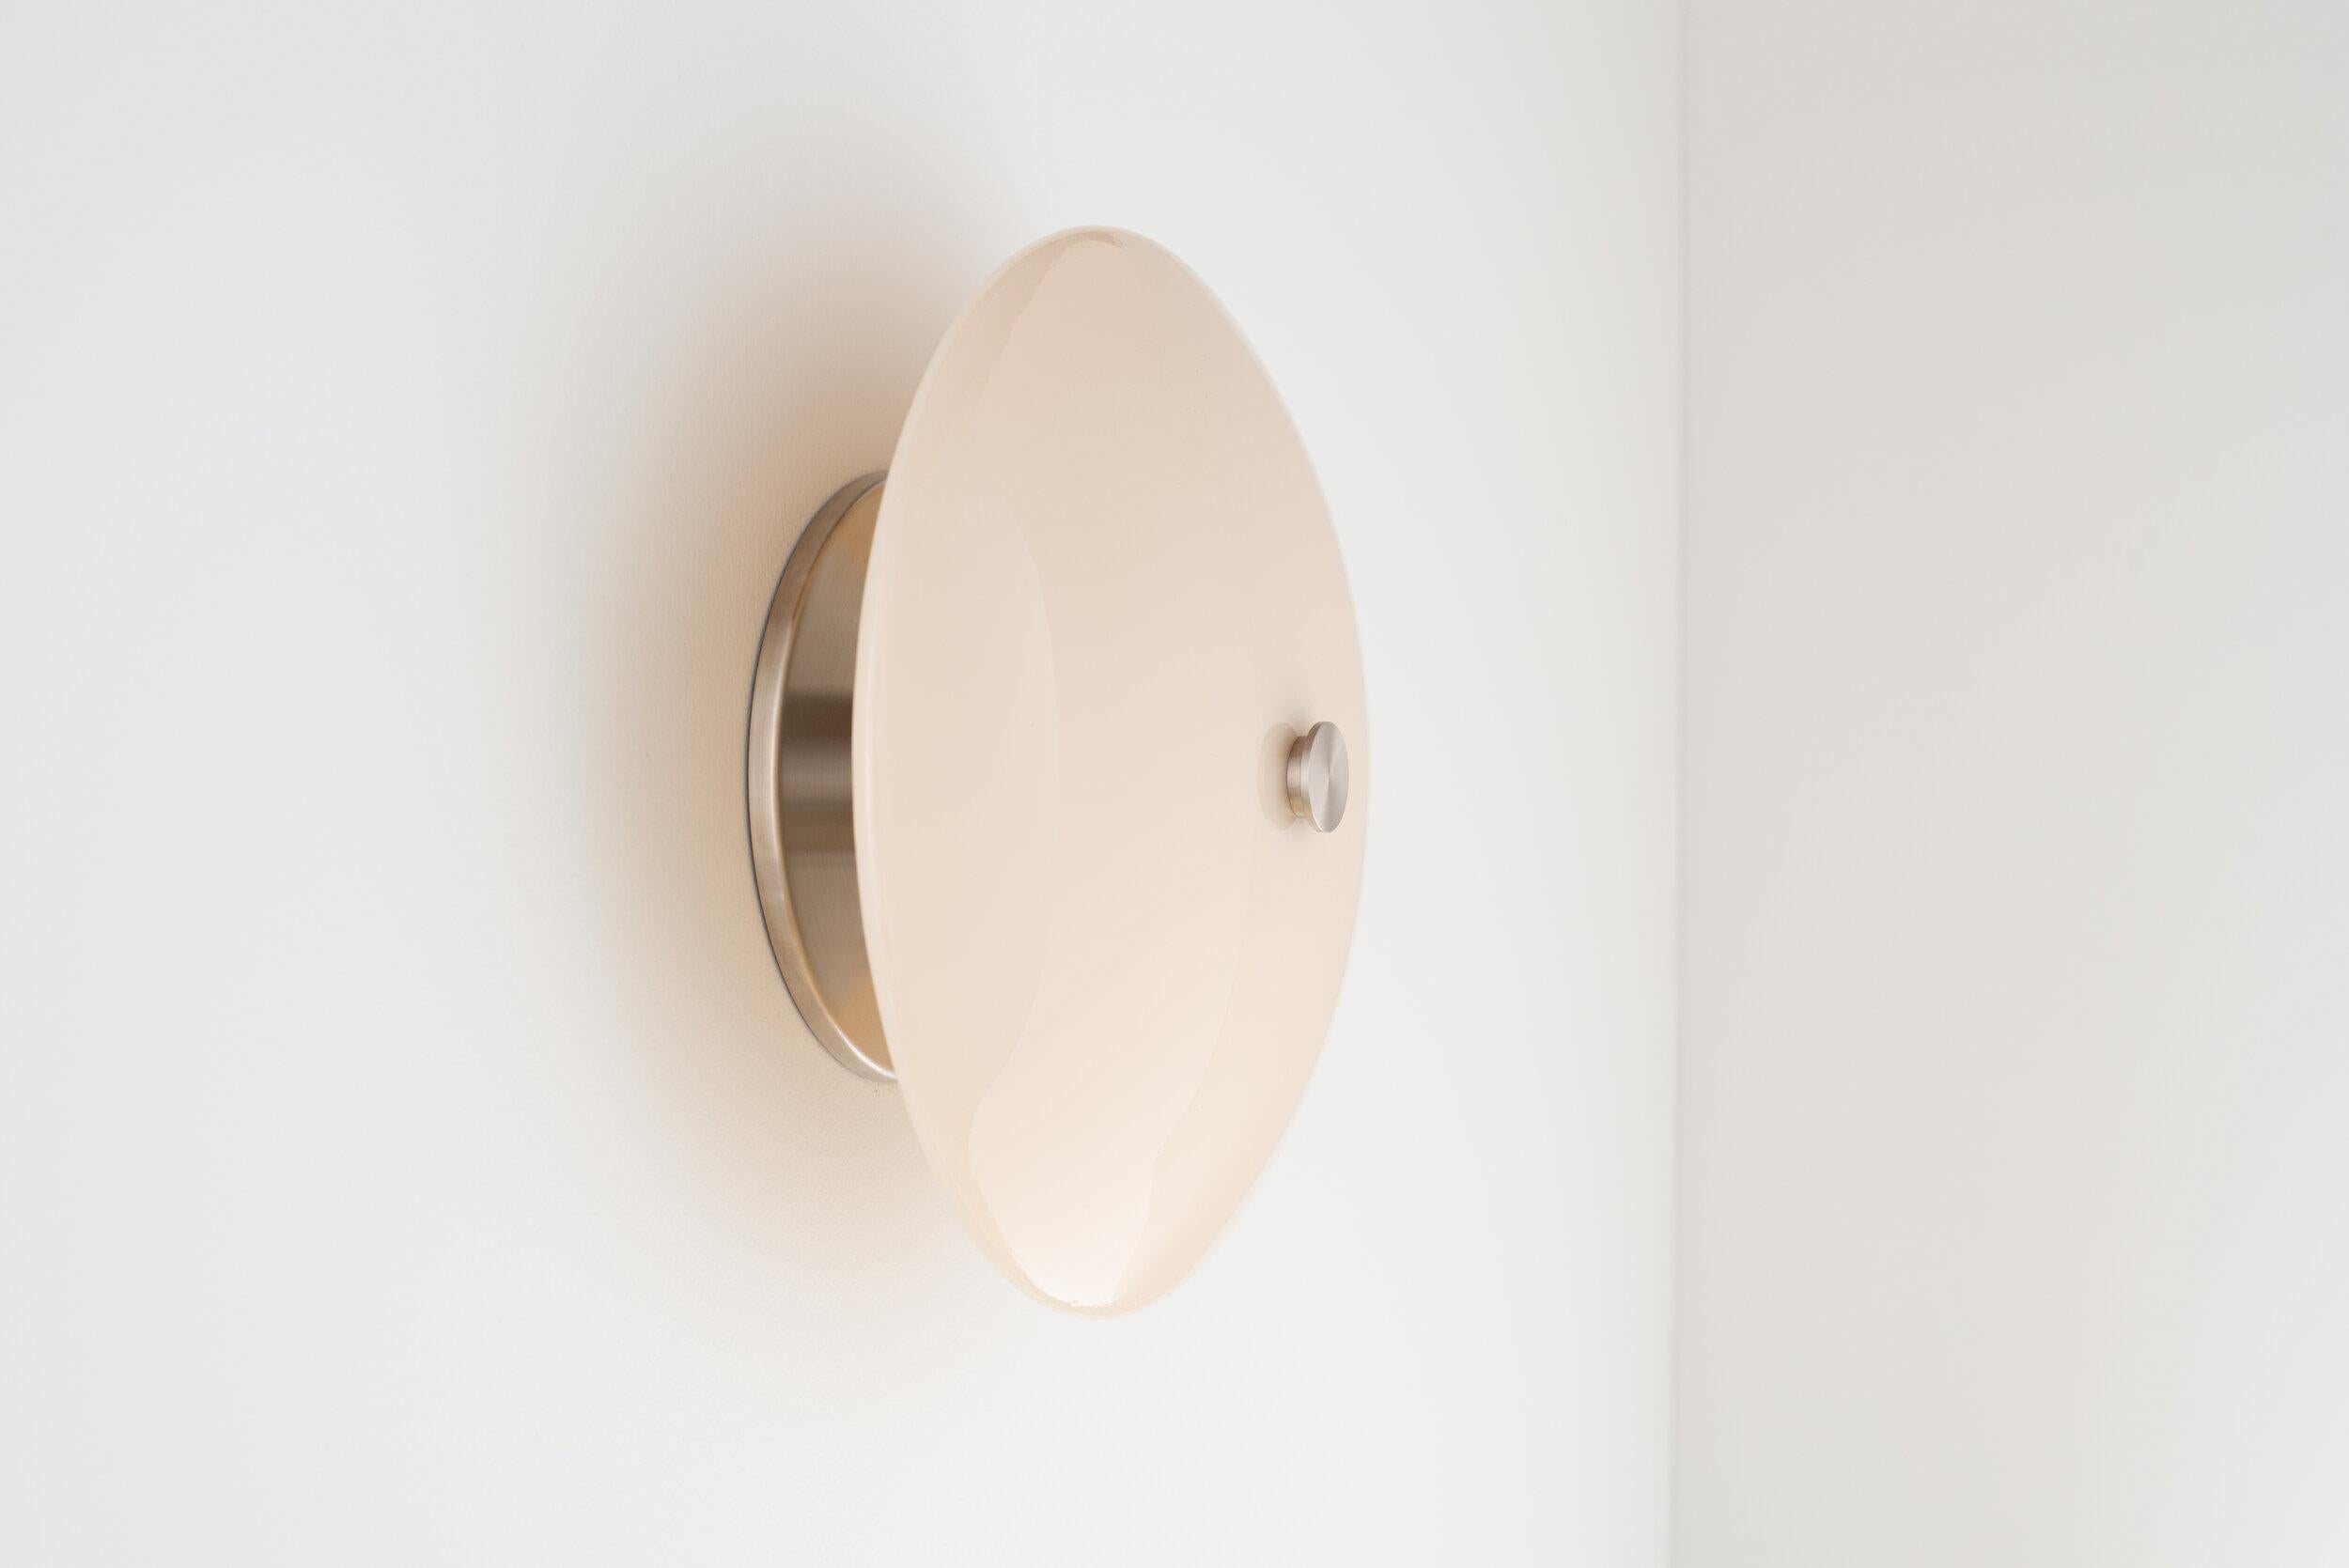 A modern dome of hand poured and slumped glass floats effortlessly off the wall providing distinct dimmable illumination. 

The Lyra sconce is available in multiple glass colors and illuminated by a 120V AC direct drive led module with no external